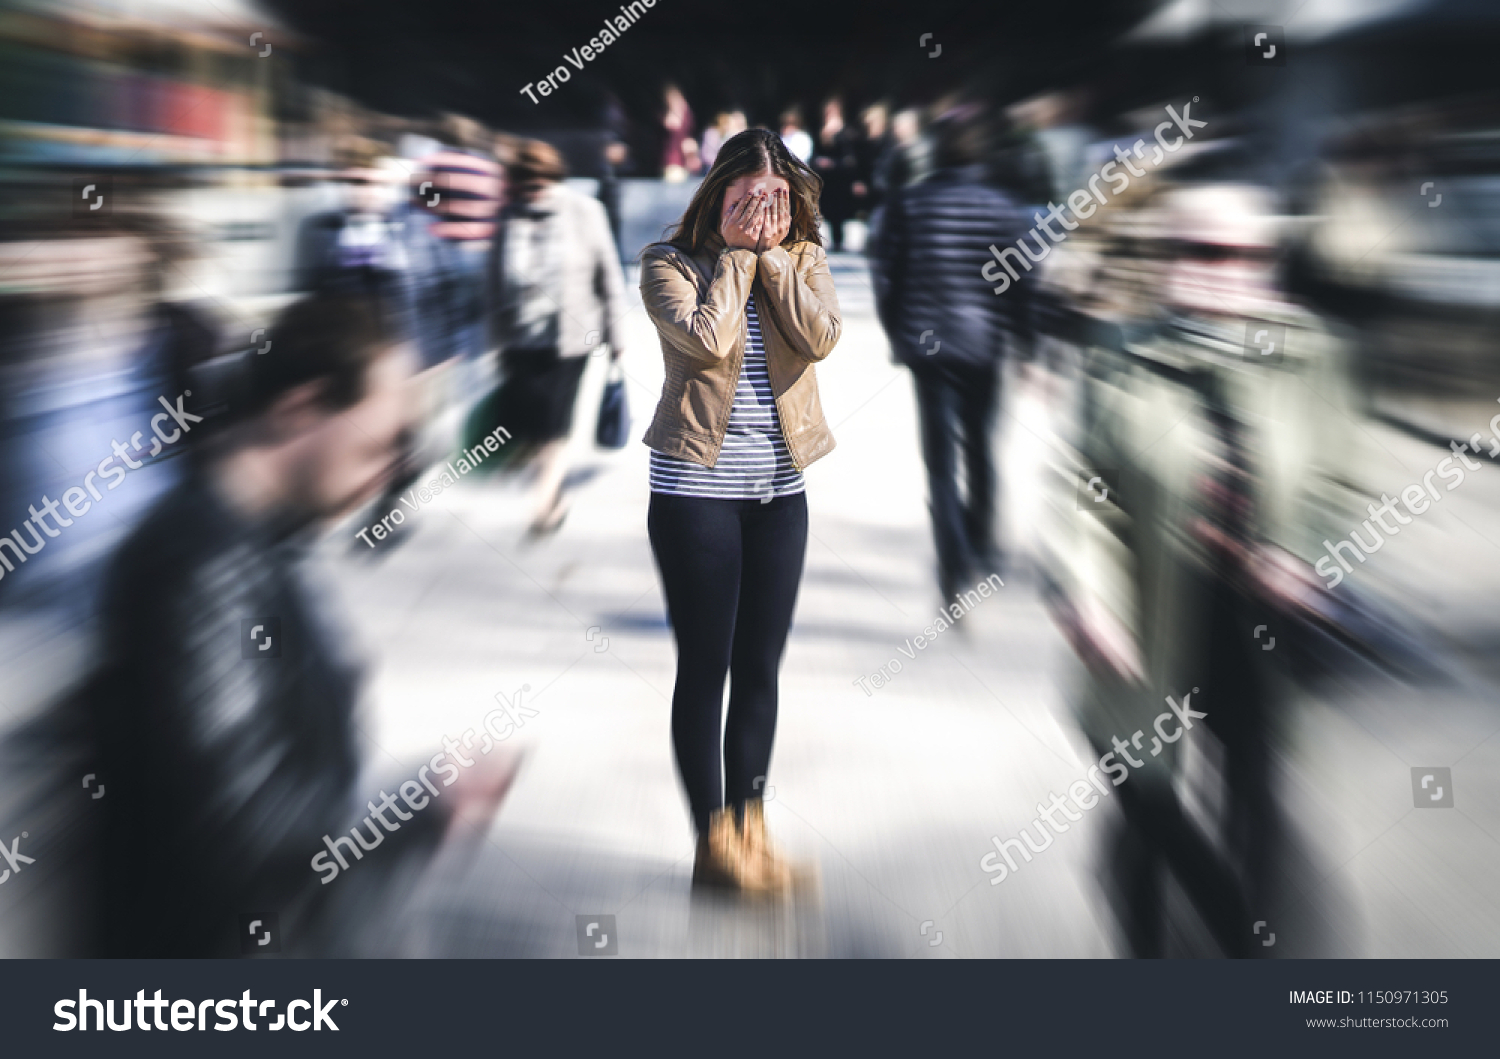 Panic attack in public place. Woman having panic disorder in city. Psychology, solitude, fear or mental health problems concept. Depressed sad person surrounded by people walking in busy street. #1150971305